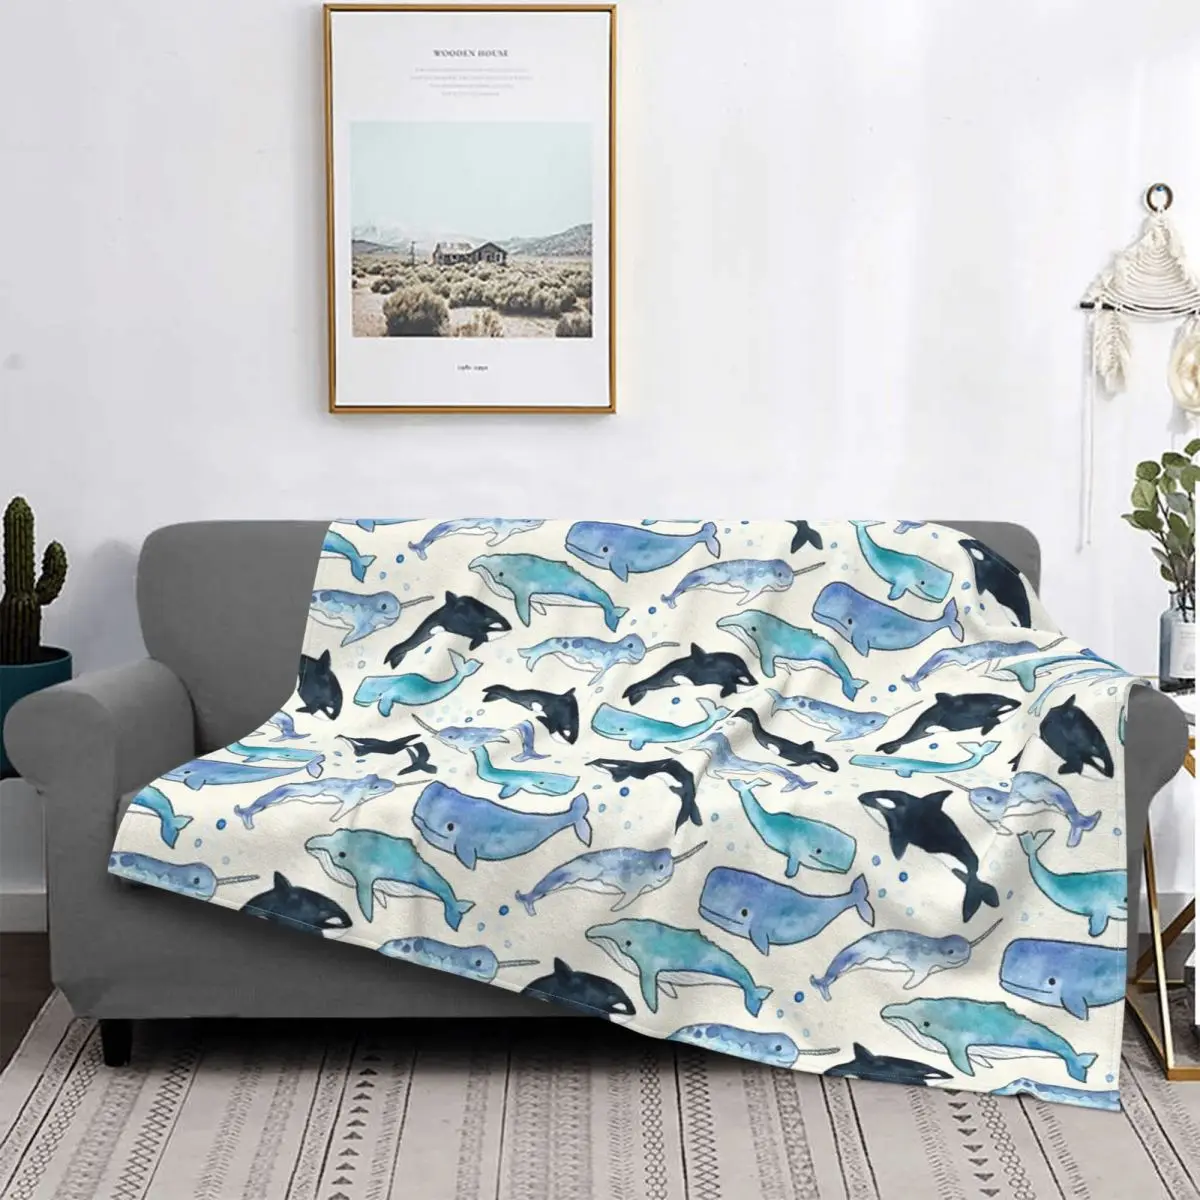 

Whales Orcas and Narwhals Throw Blanket, Soft Cozy Luxury Bed Blanket Microfiber Fleece Blanket All Season Lightweight Throw